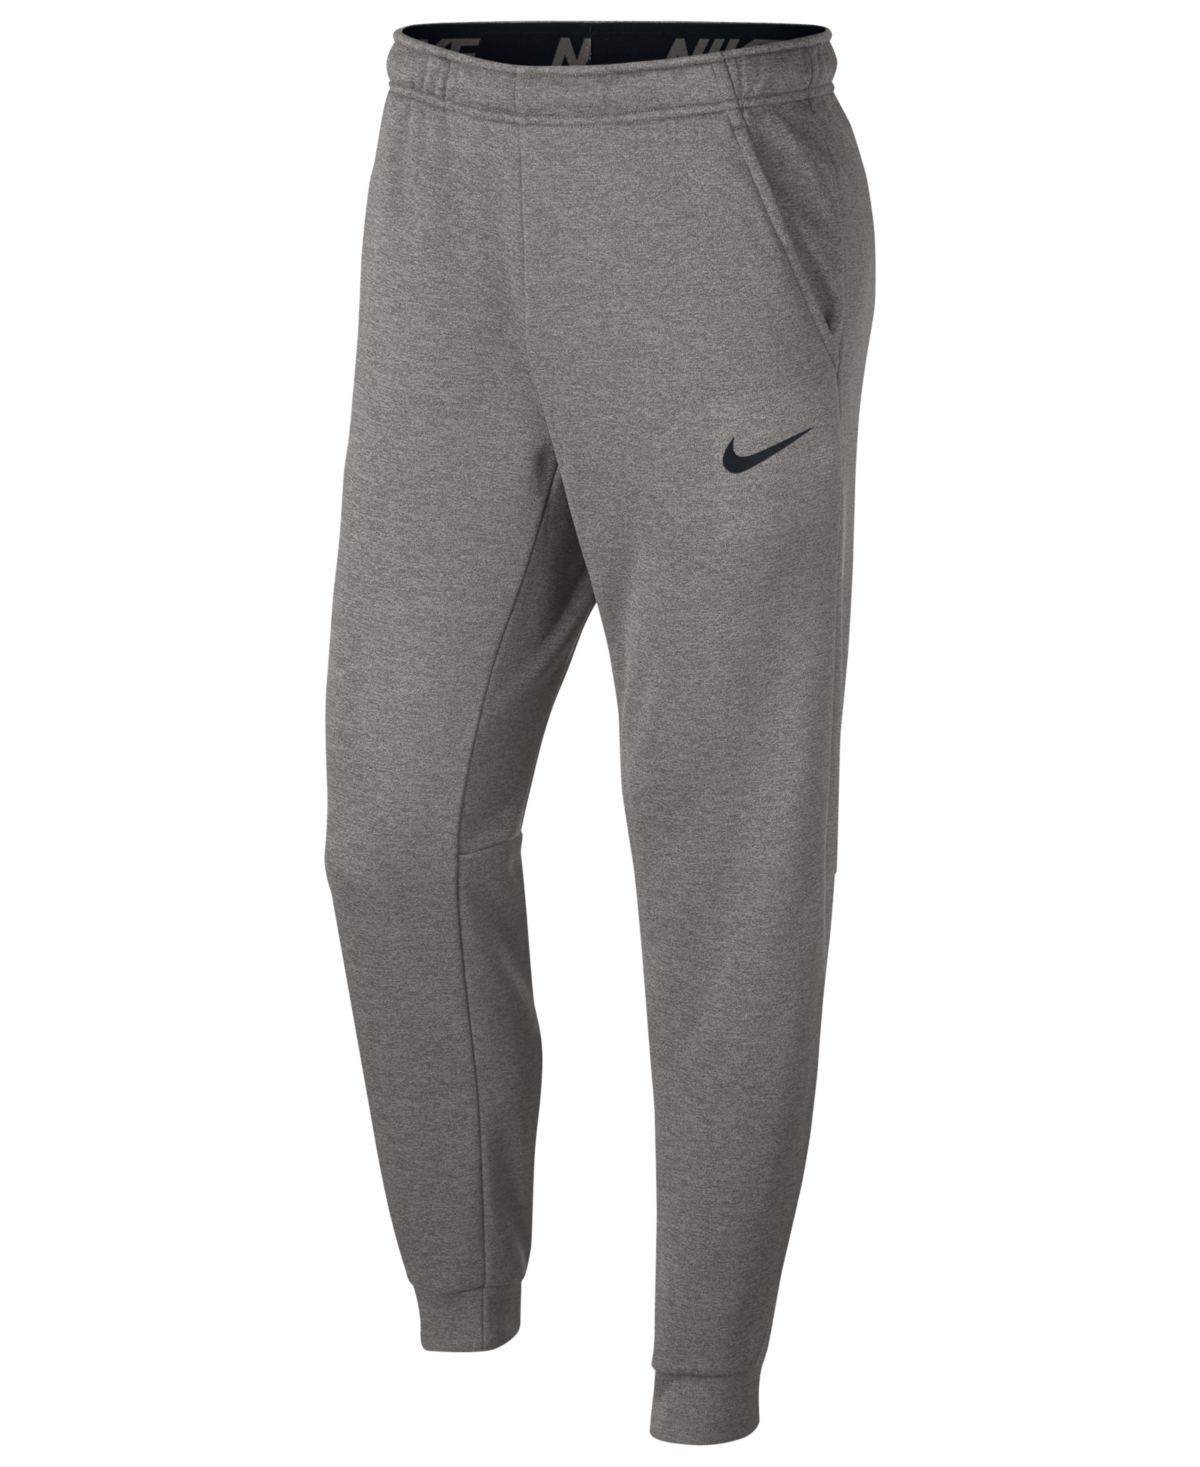 UPC 191884005752 product image for Nike Men's Therma Tapered Training Pants | upcitemdb.com